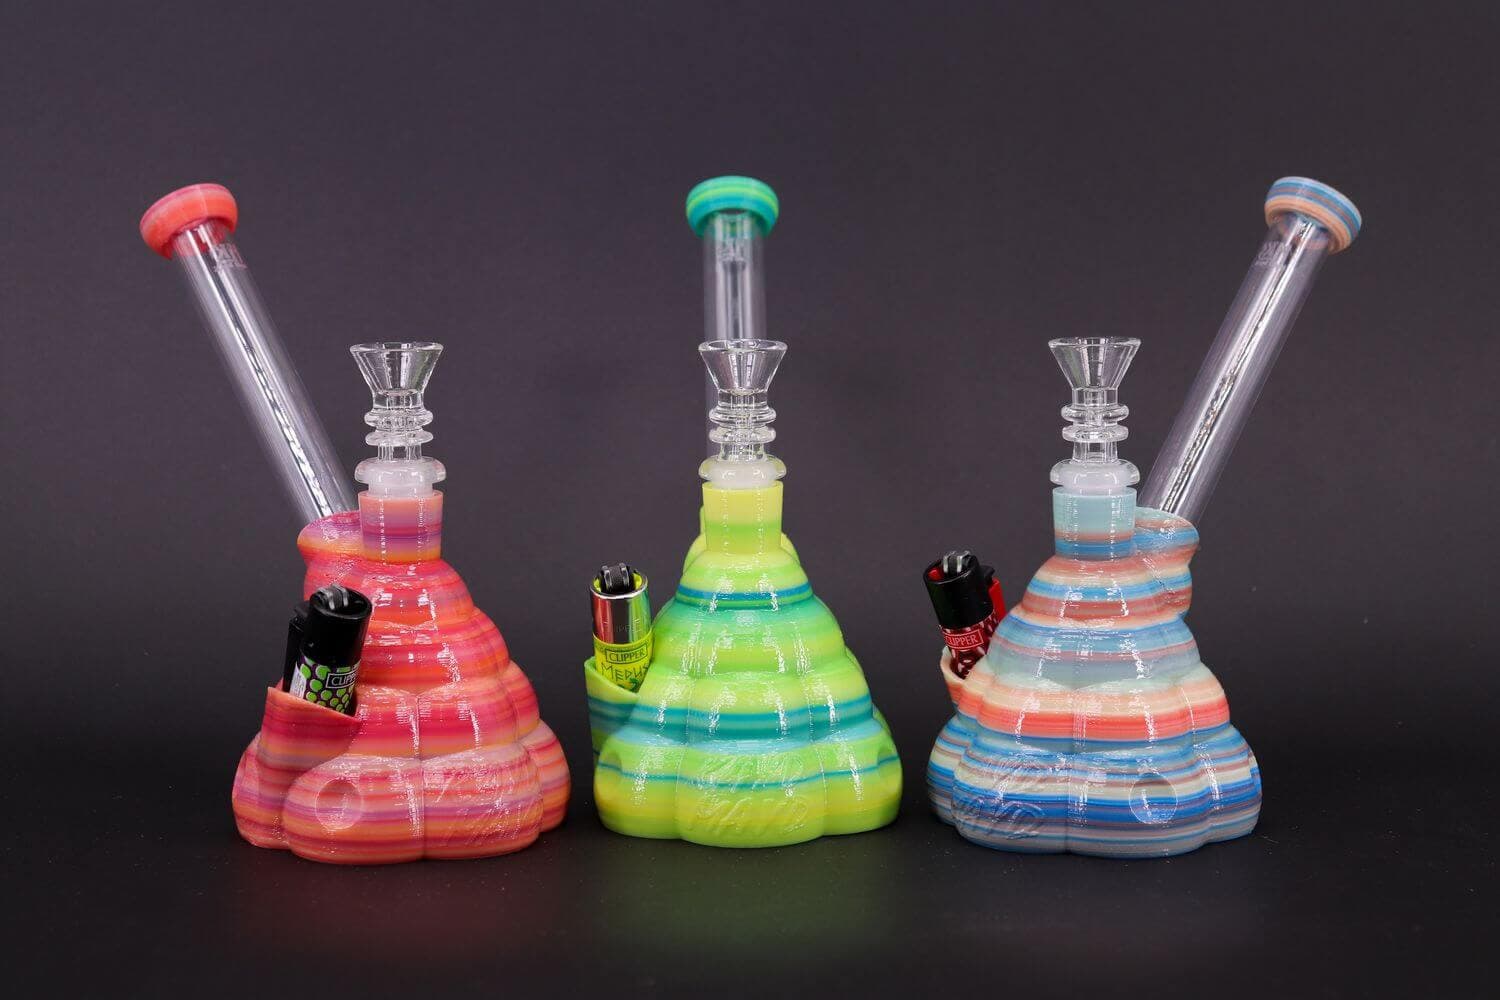 A group of 3 Cotton Mouth's together - Amazing 3D Printed Water Pipe by Kayd Mayd